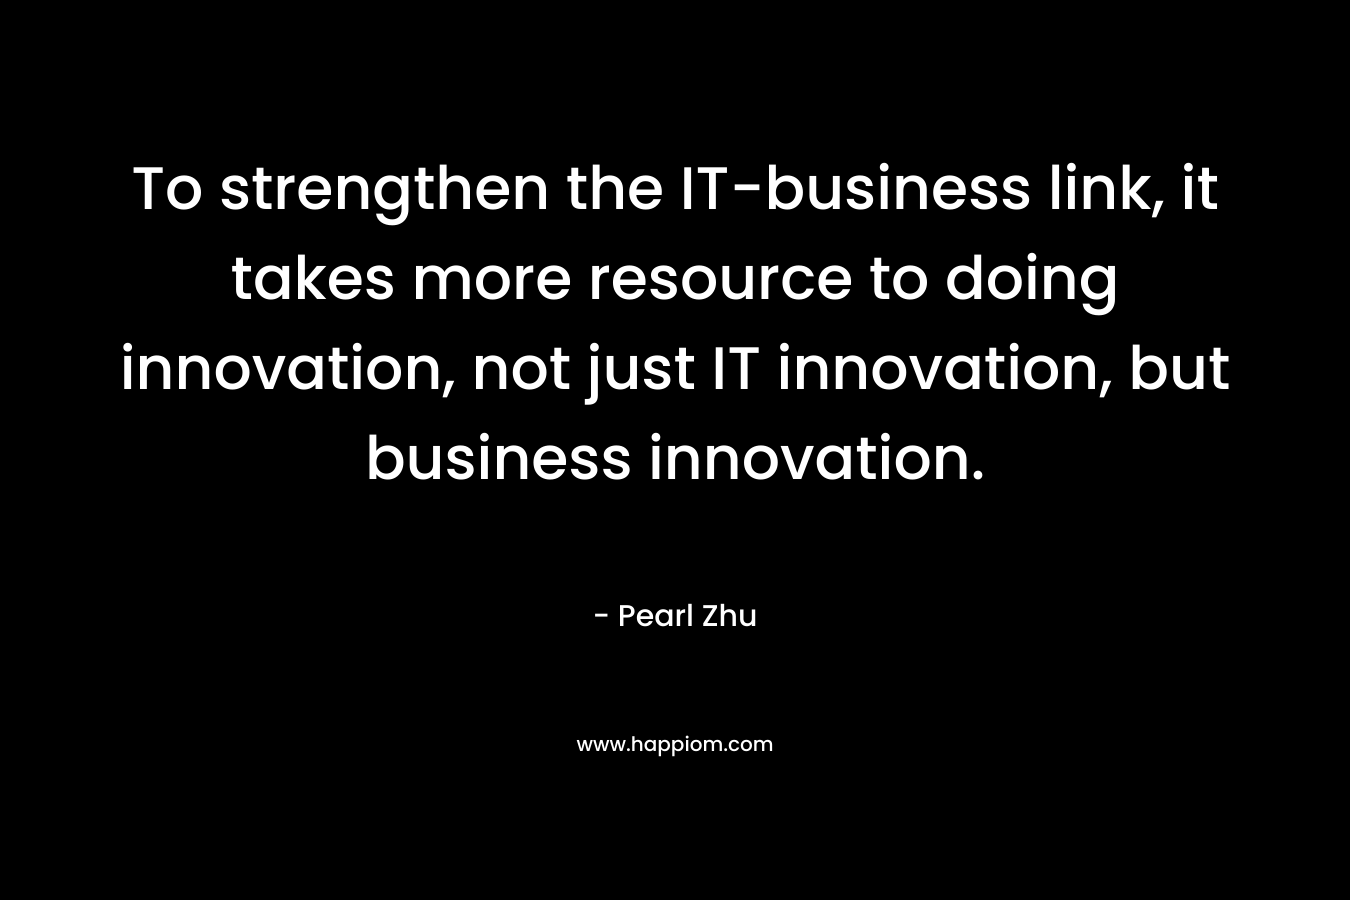 To strengthen the IT-business link, it takes more resource to doing innovation, not just IT innovation, but business innovation. – Pearl  Zhu